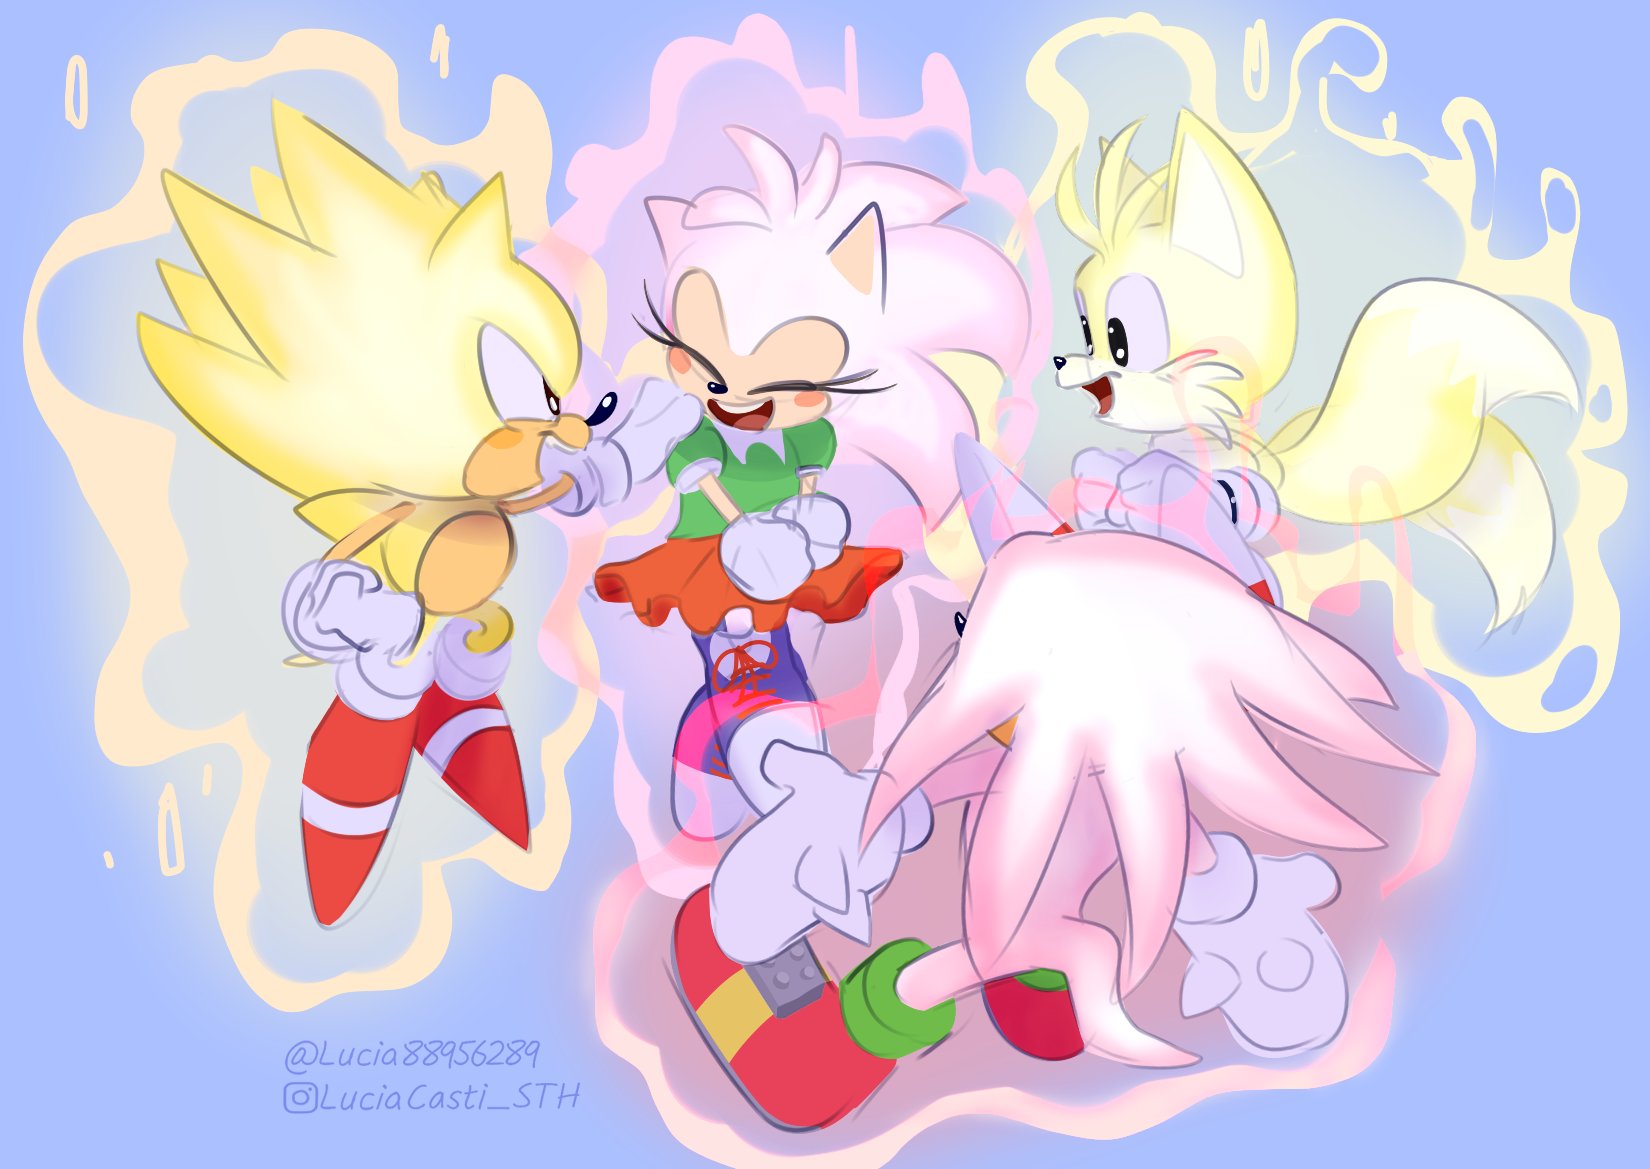 Hyper Sonic (Classic)  Sonic, Classic sonic, Sonic fan characters